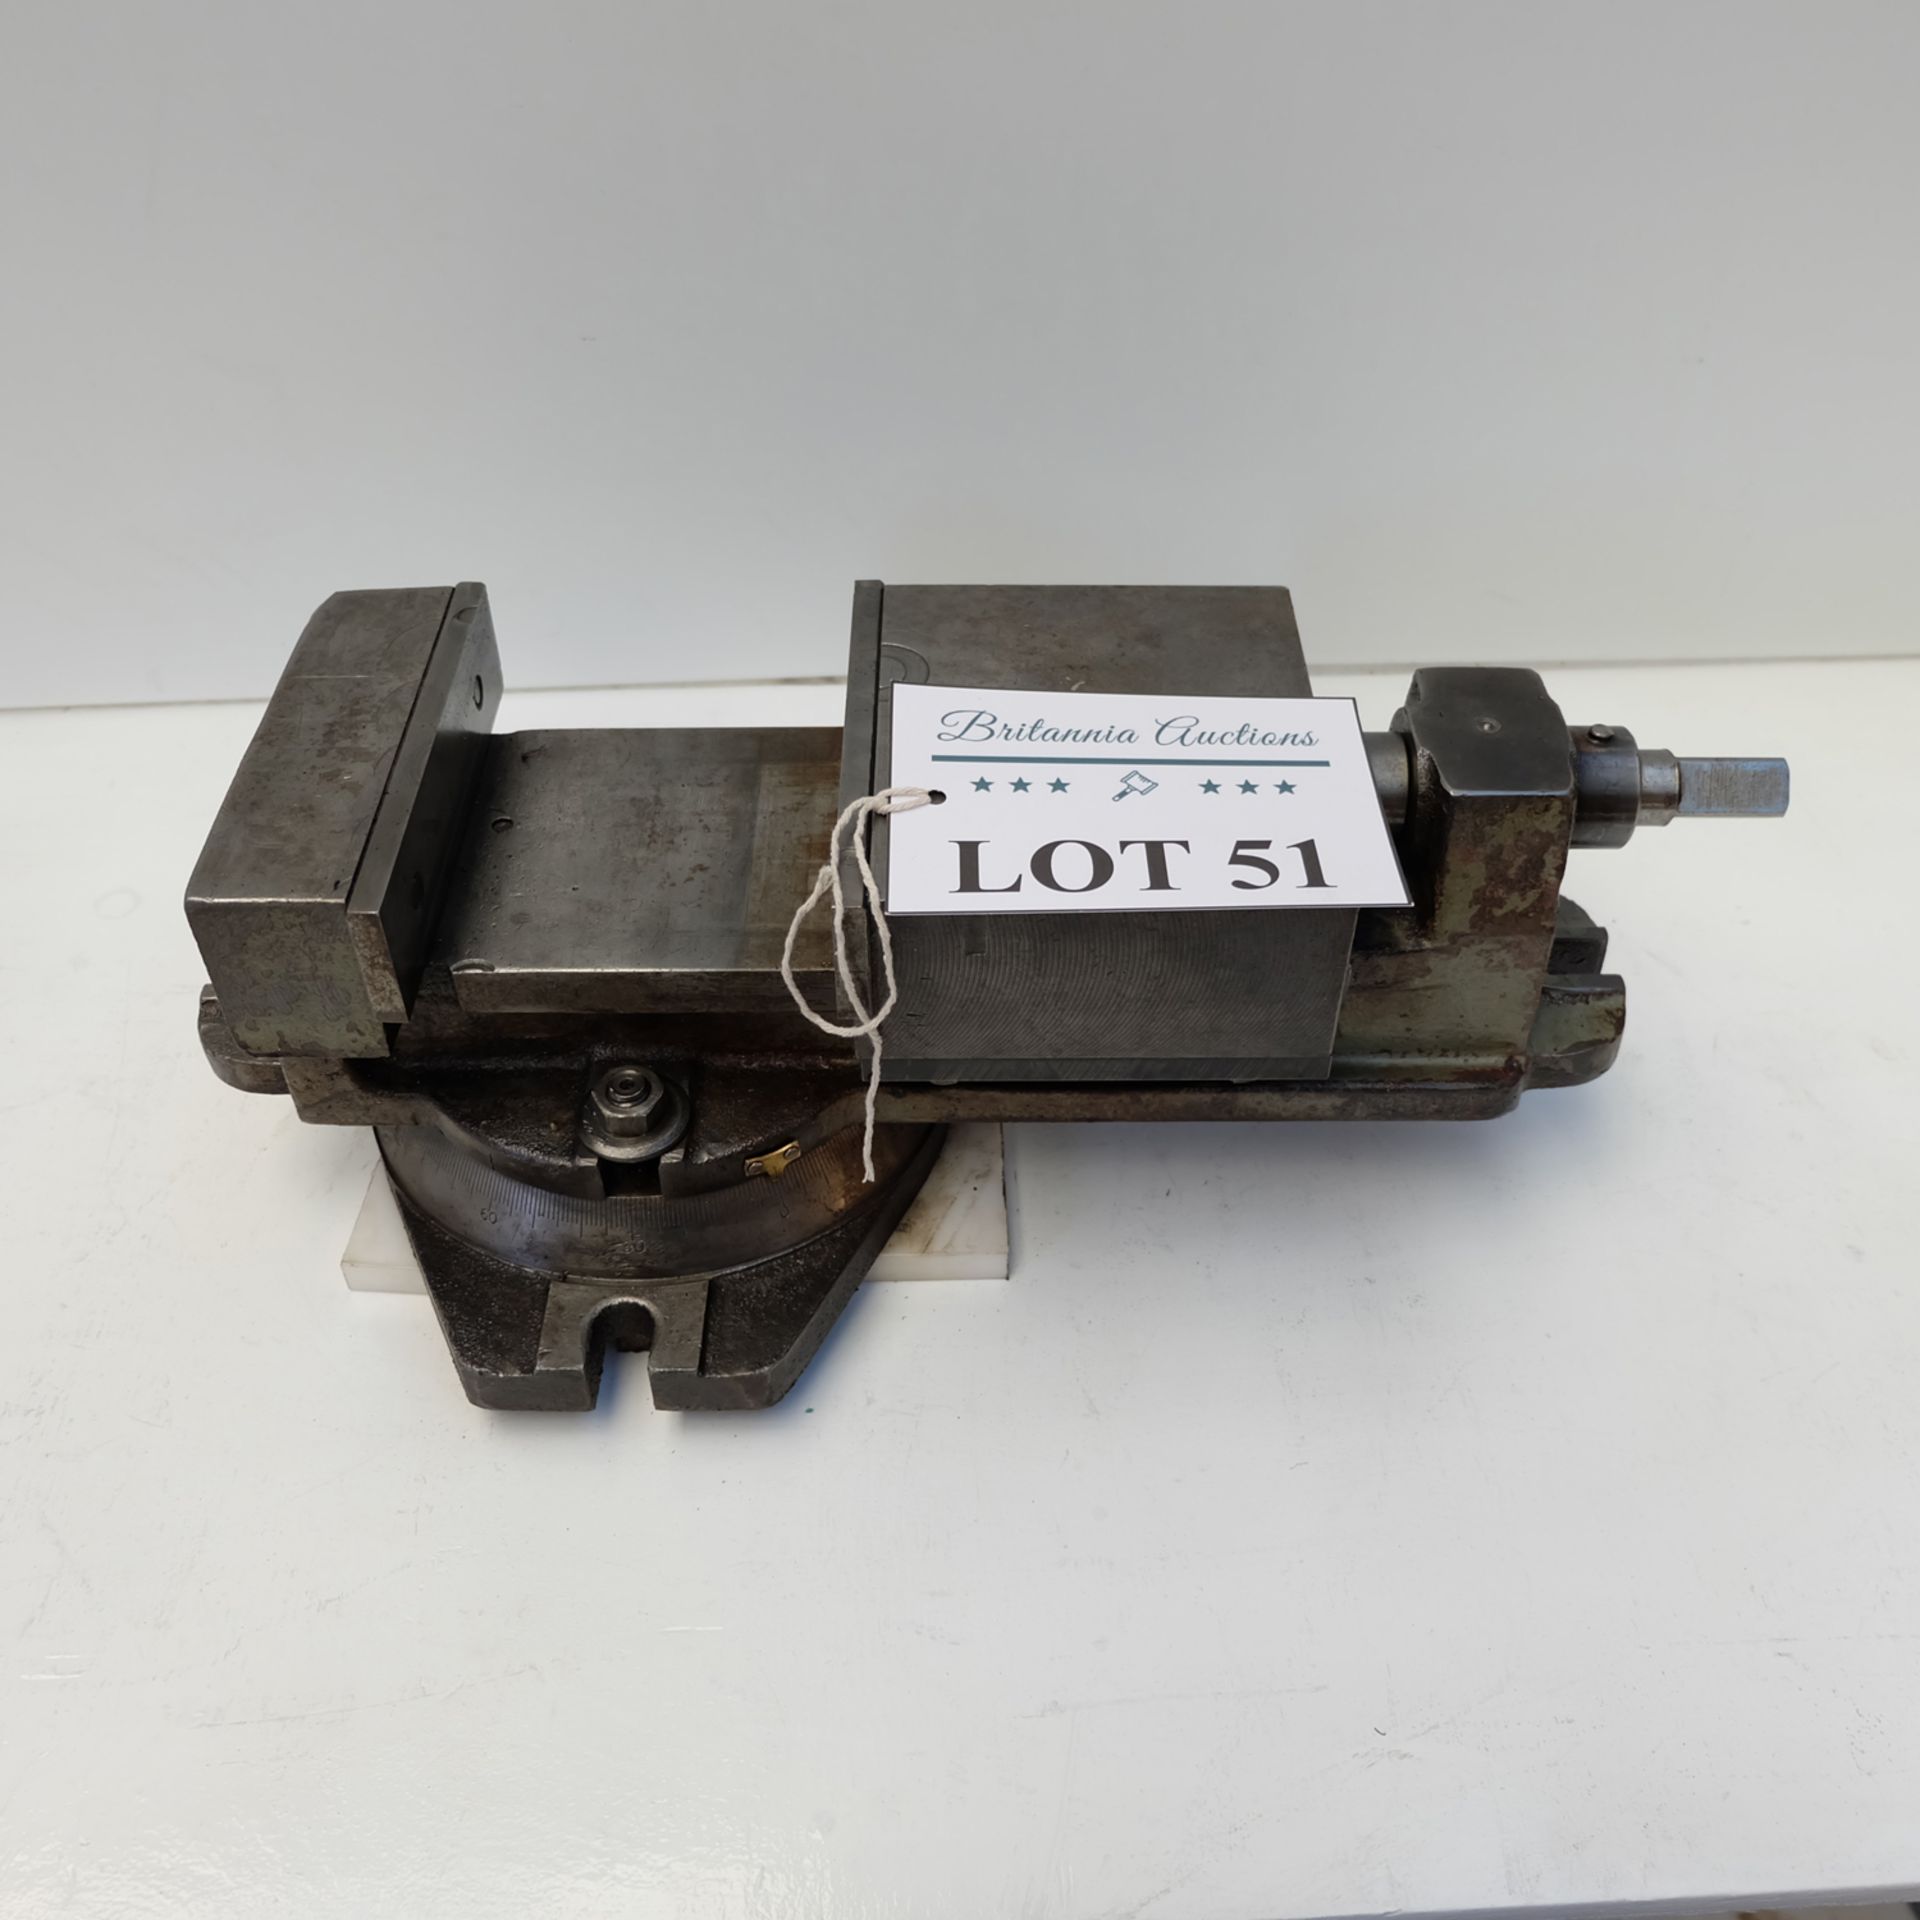 Swivelling Machine Vice. Jaw Width 6". Max Opening 4 1/4". Jaw Height 1 1/2" Approx.